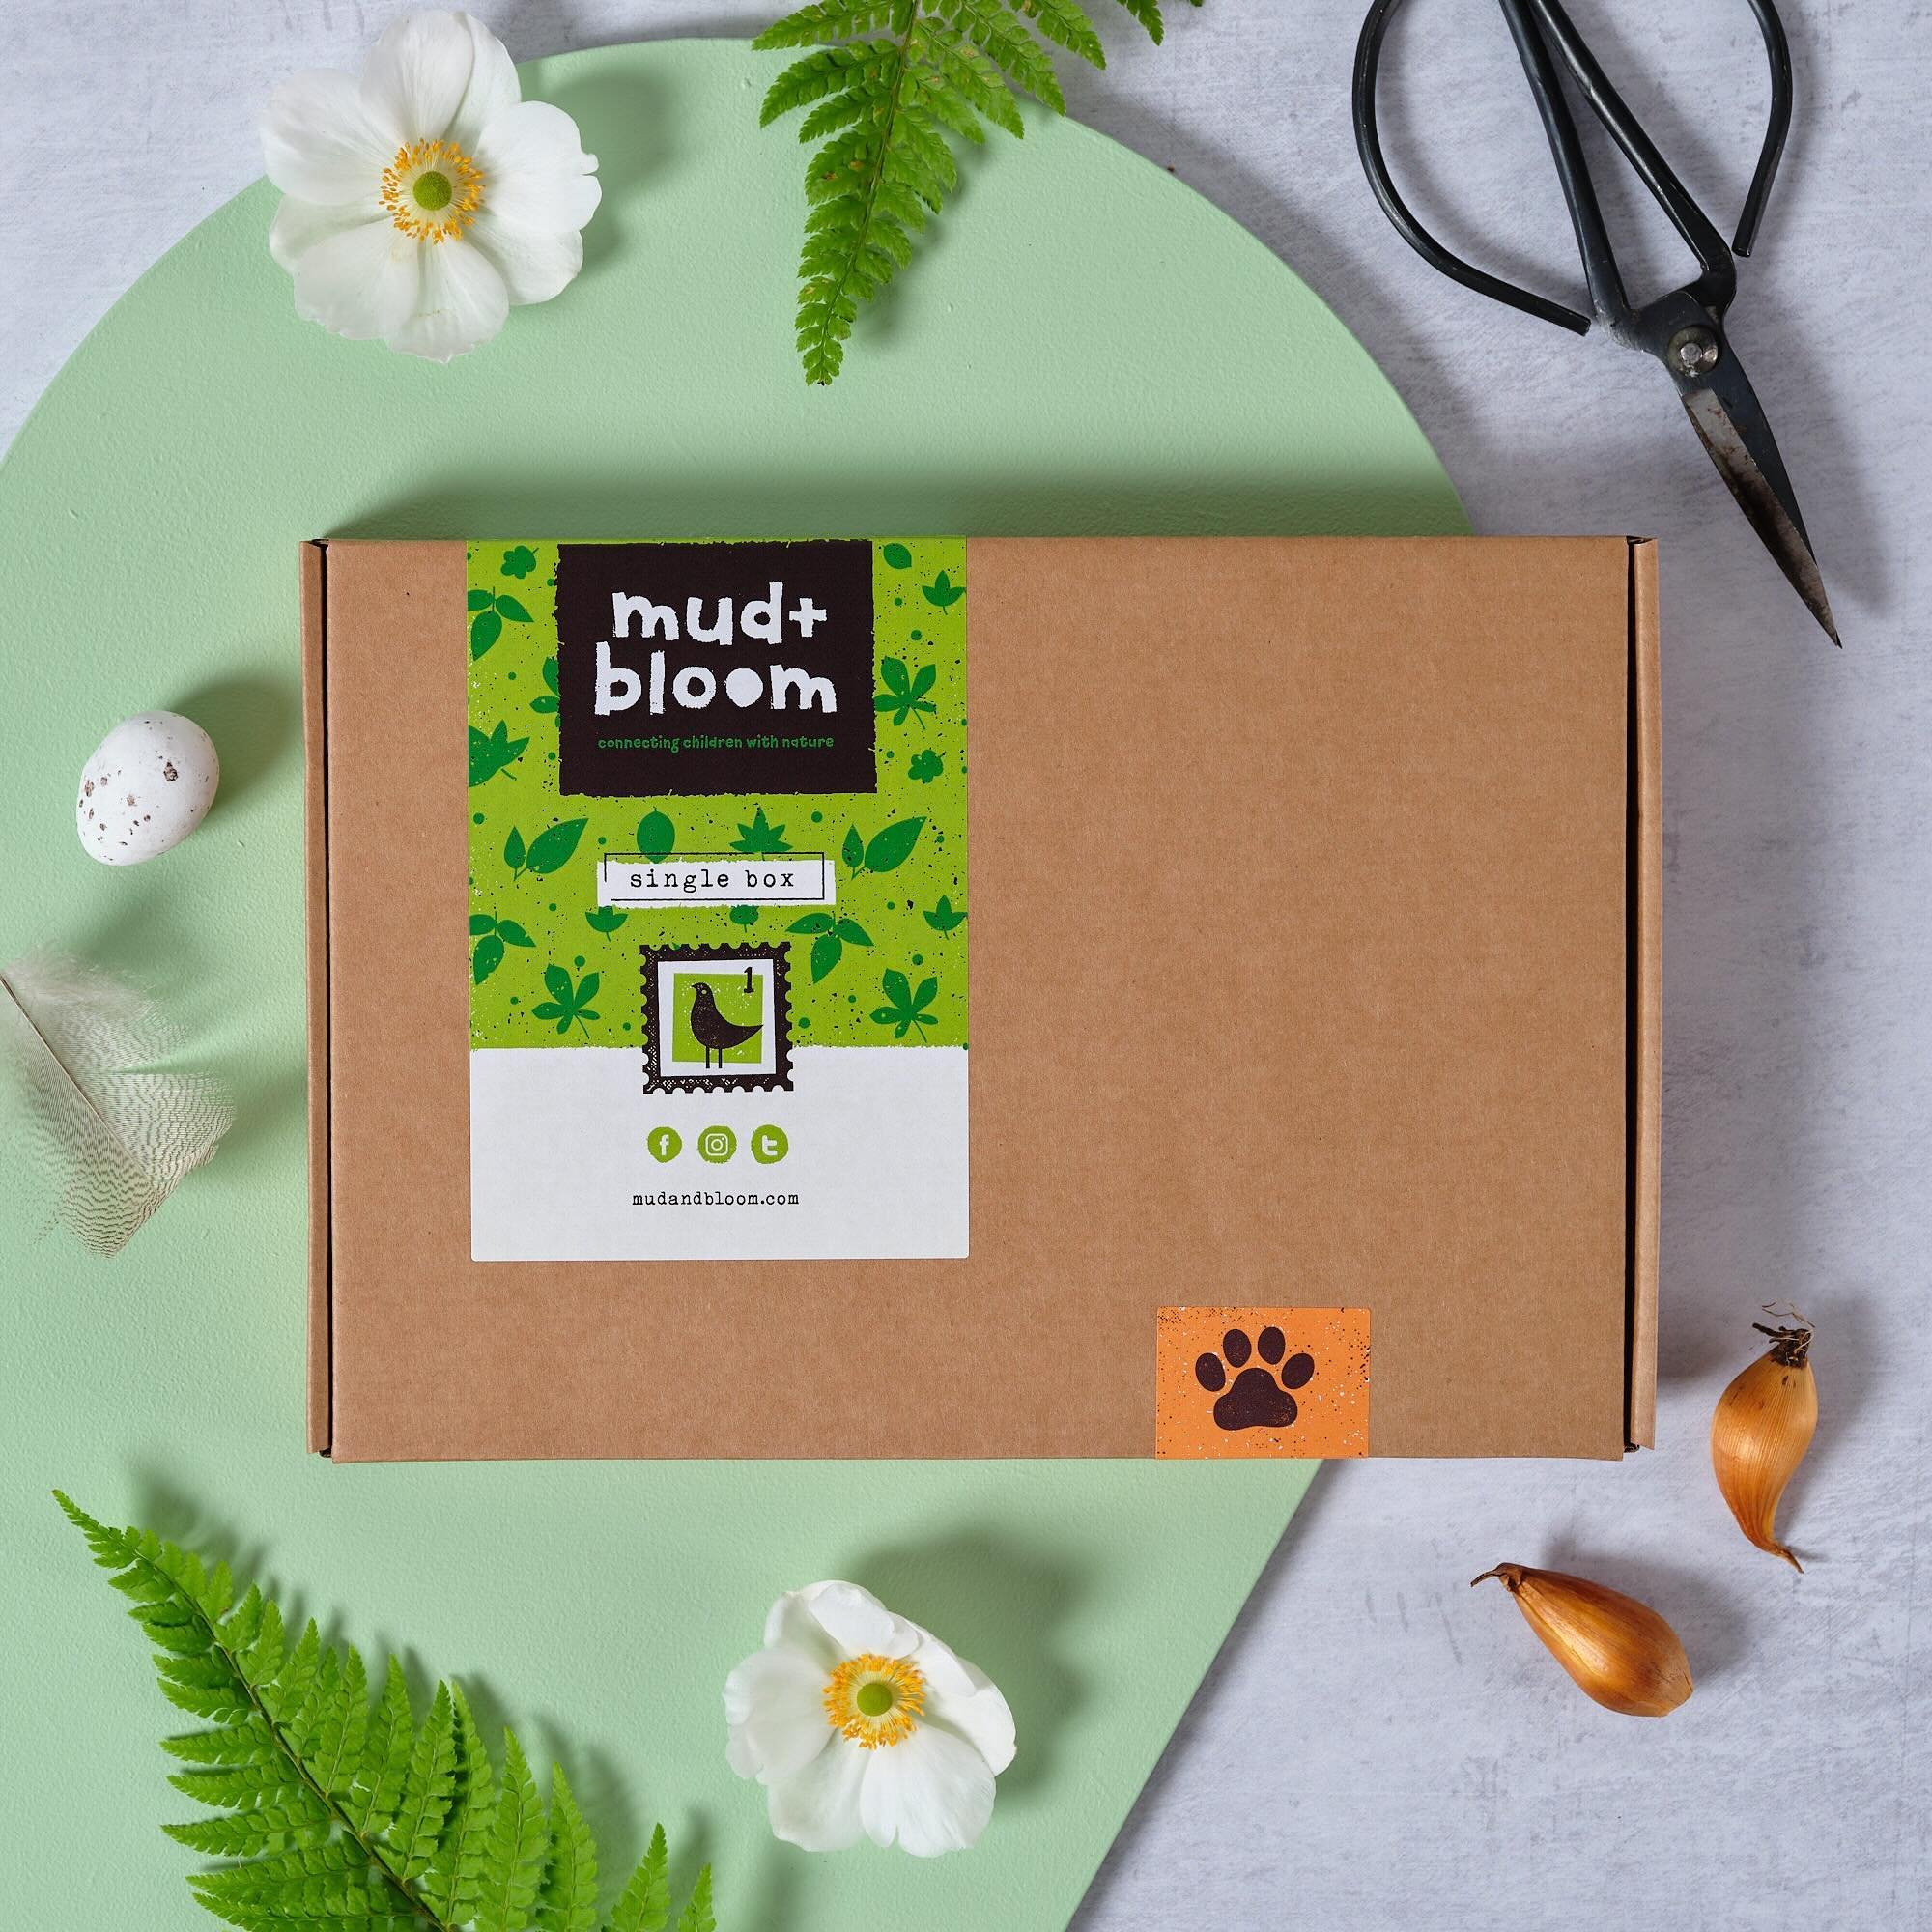 We&rsquo;ve been busy packing our May boxes today 🌱🌸🌈

As usual we&rsquo;ll reveal the box contents on here on the 1st May. If you&rsquo;re impatient however, and want a peek at the contents already, you can find them on our homepage! 😉

You can 